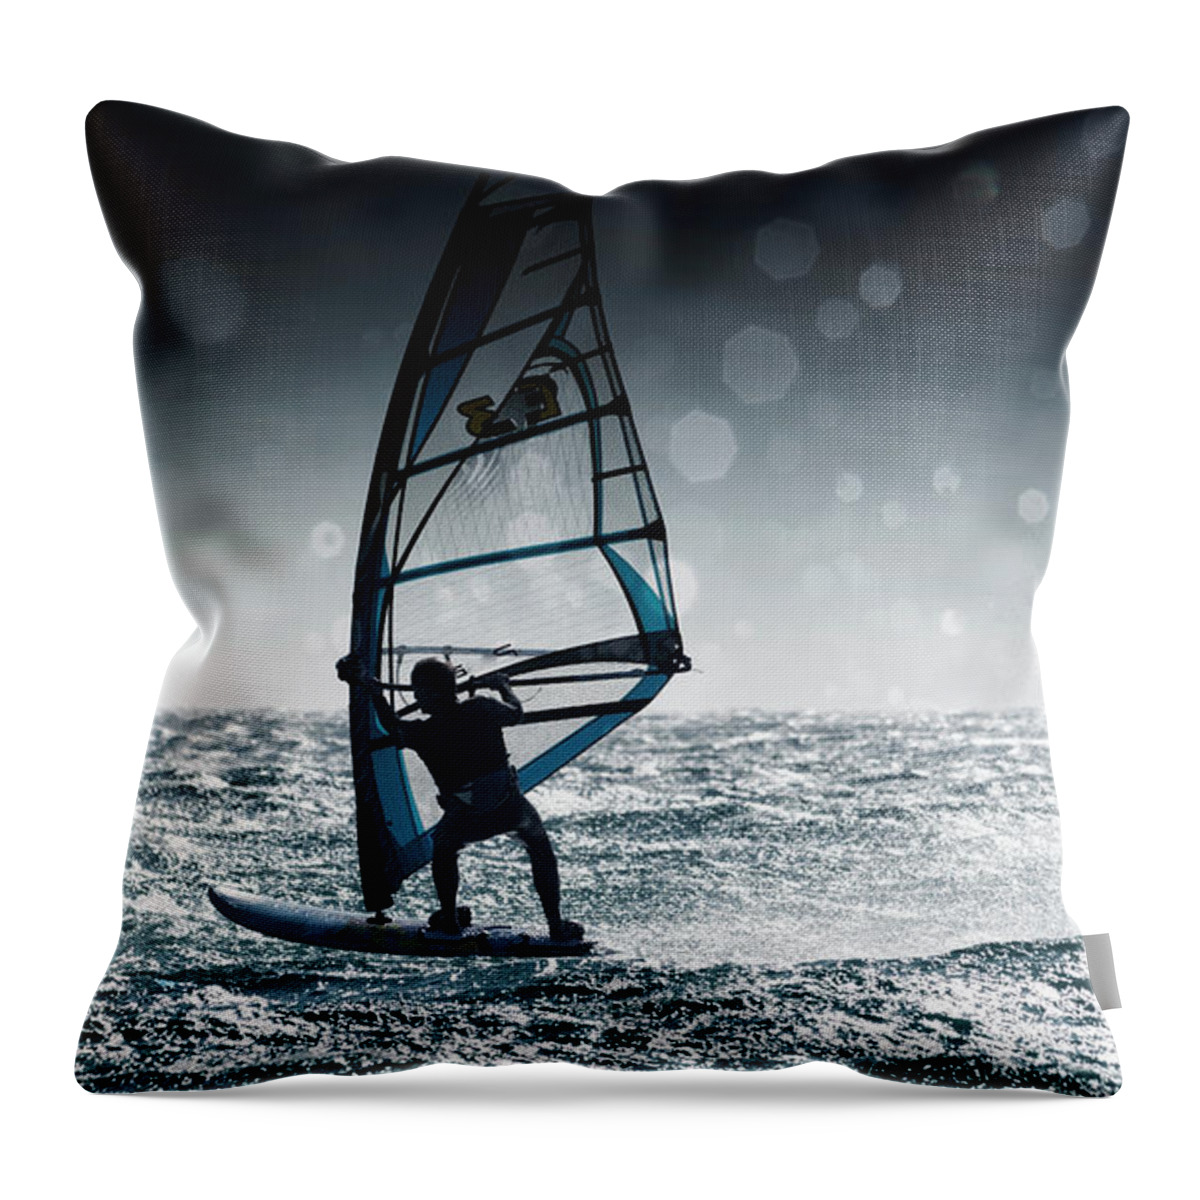 People Throw Pillow featuring the photograph Windsurfing With Water Drops On Camera by Ben Welsh / Design Pics